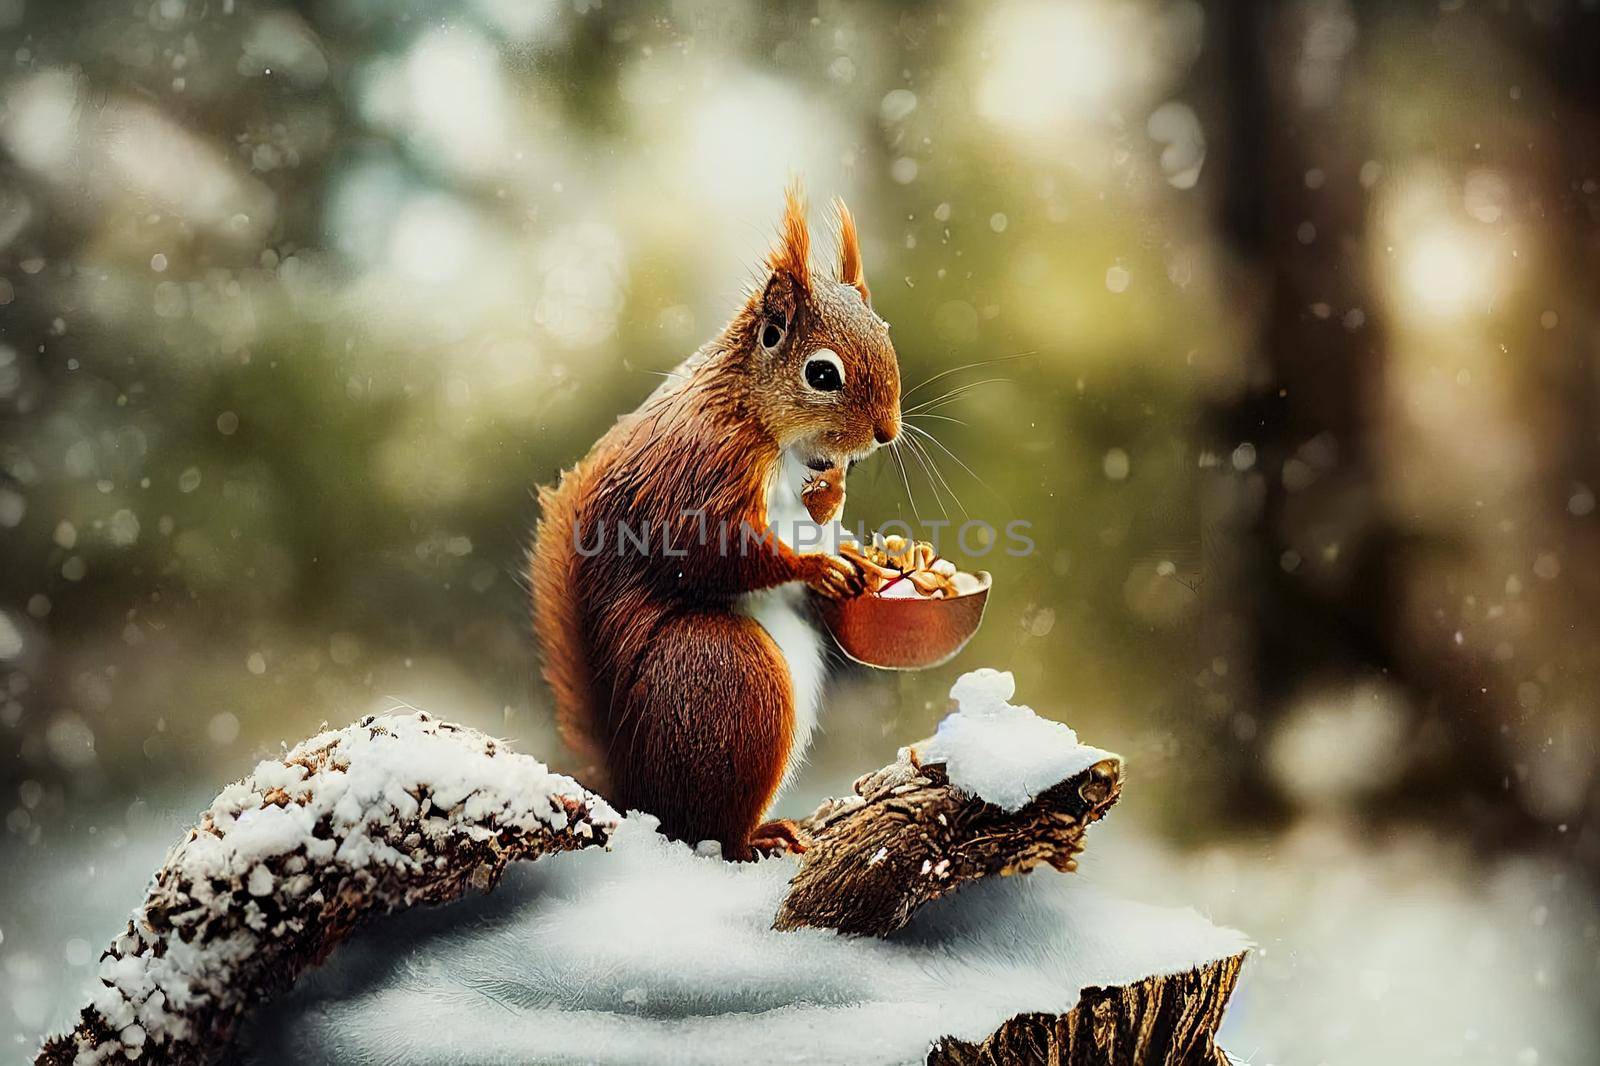 Cute red squirrel eats a nut in winter scene High quality 2d illustration. by 2ragon